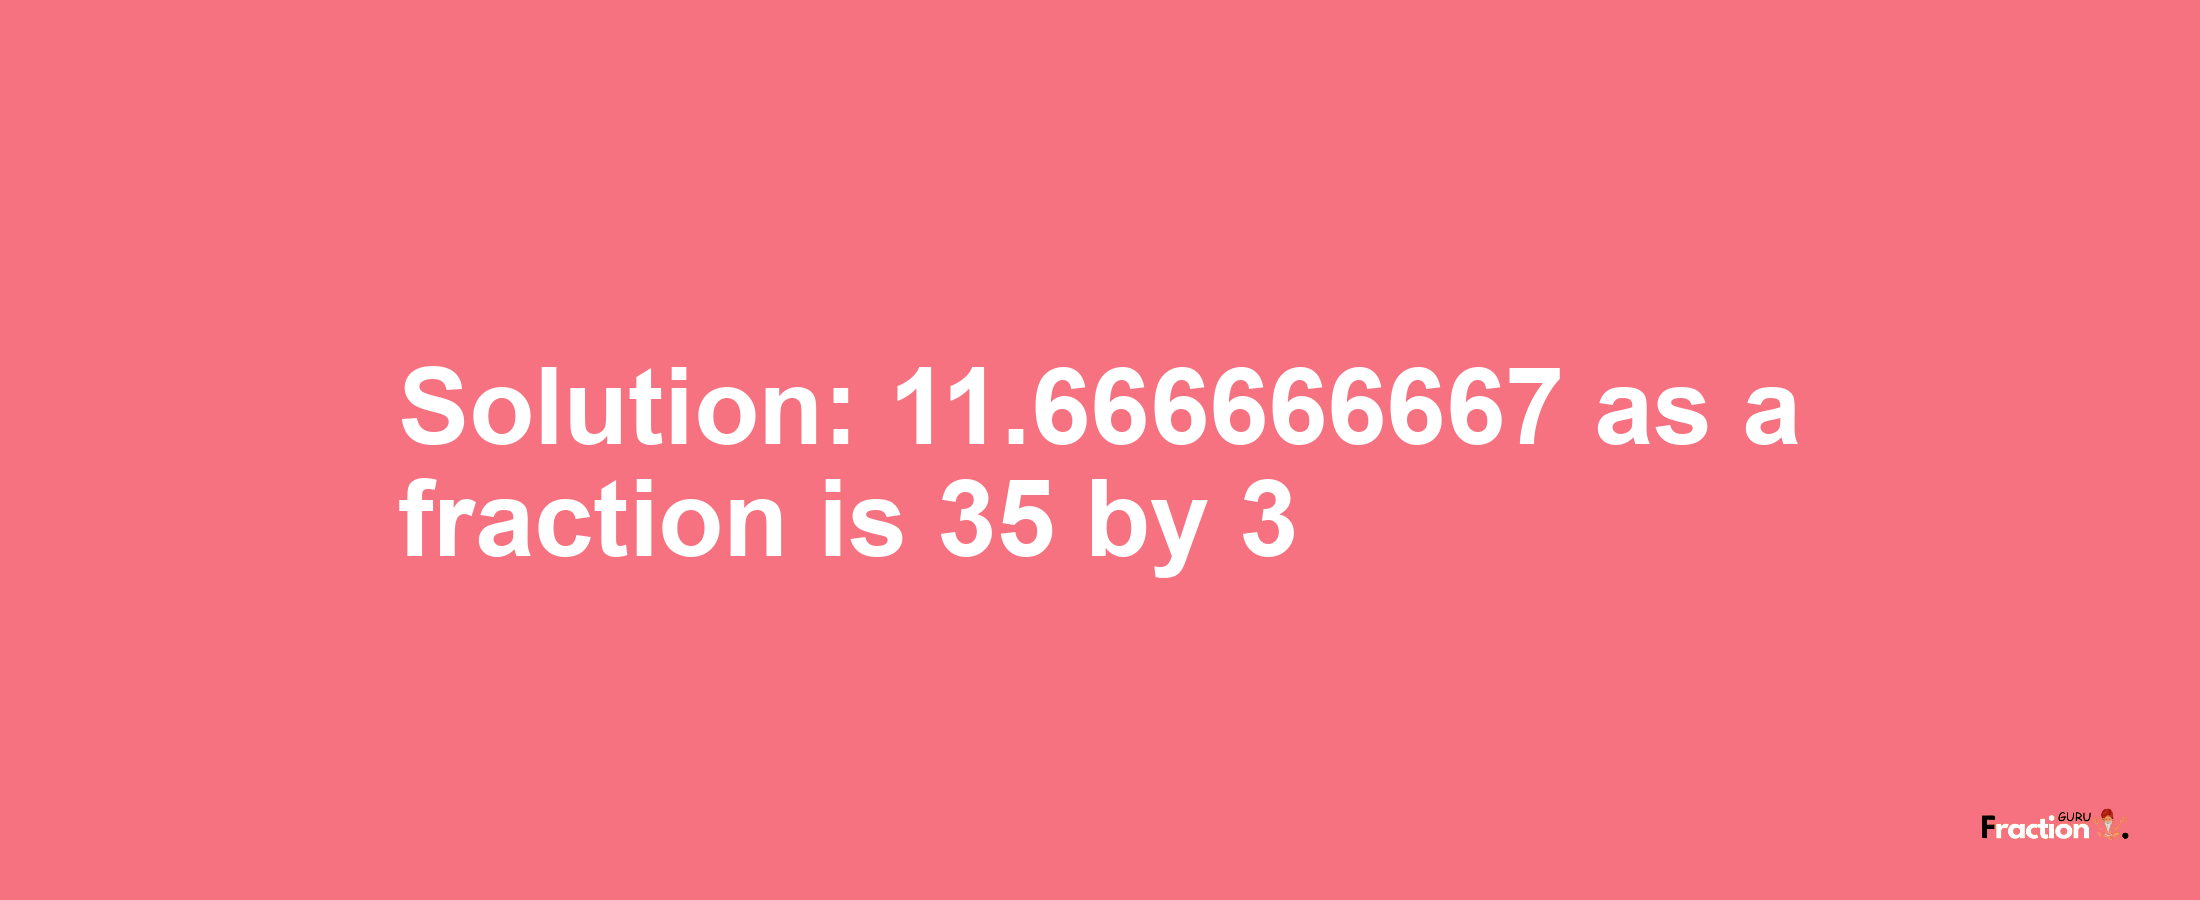 Solution:11.666666667 as a fraction is 35/3